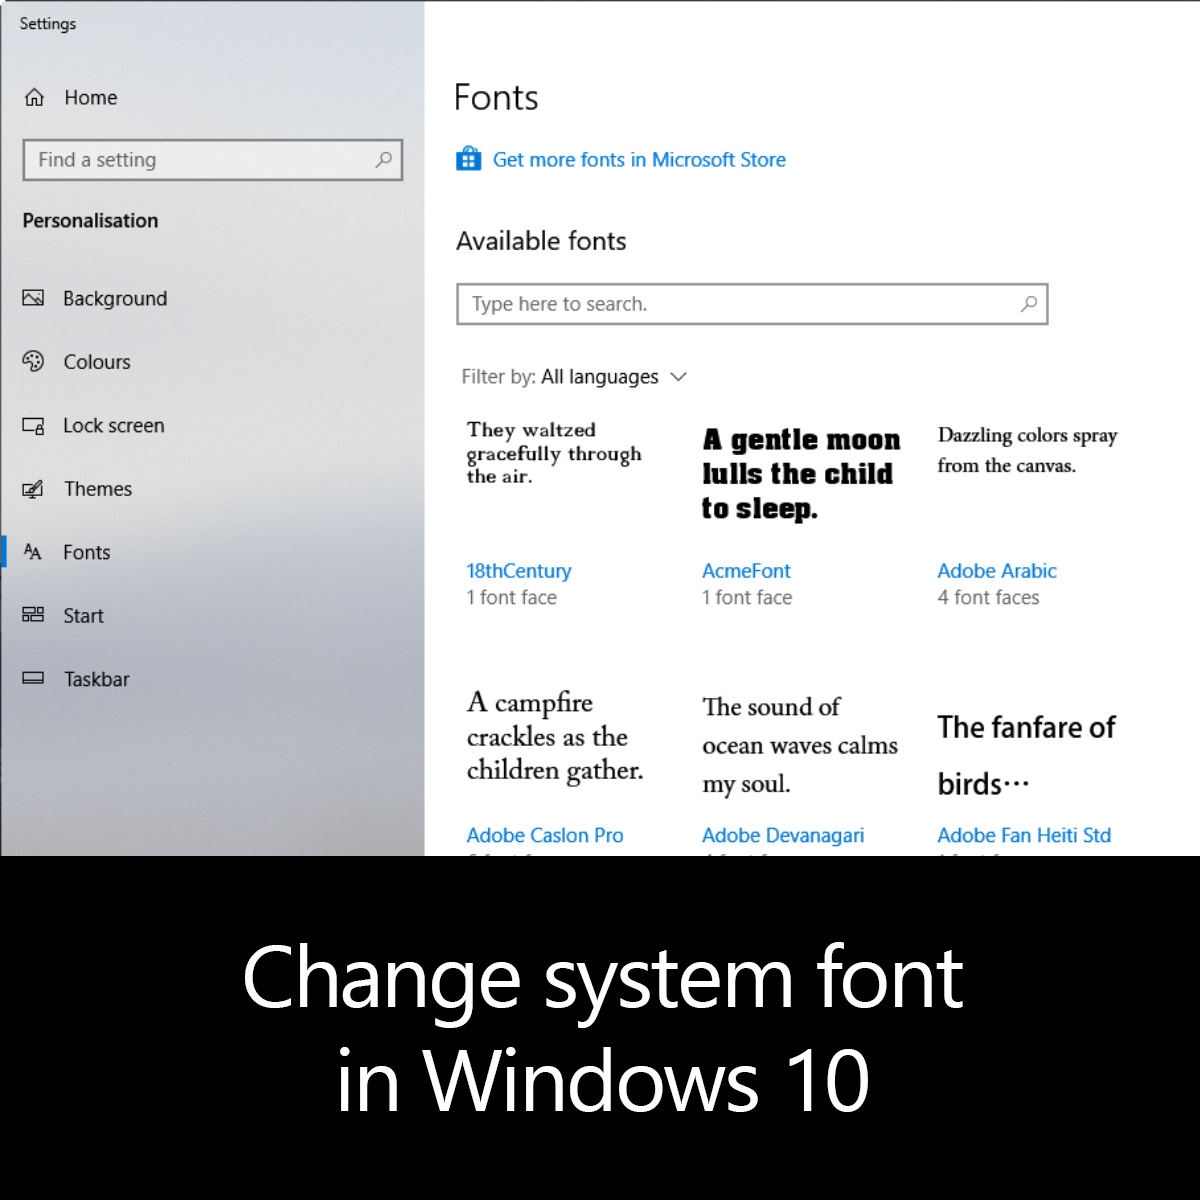 windows 10 segoe ui font has been replaced on install